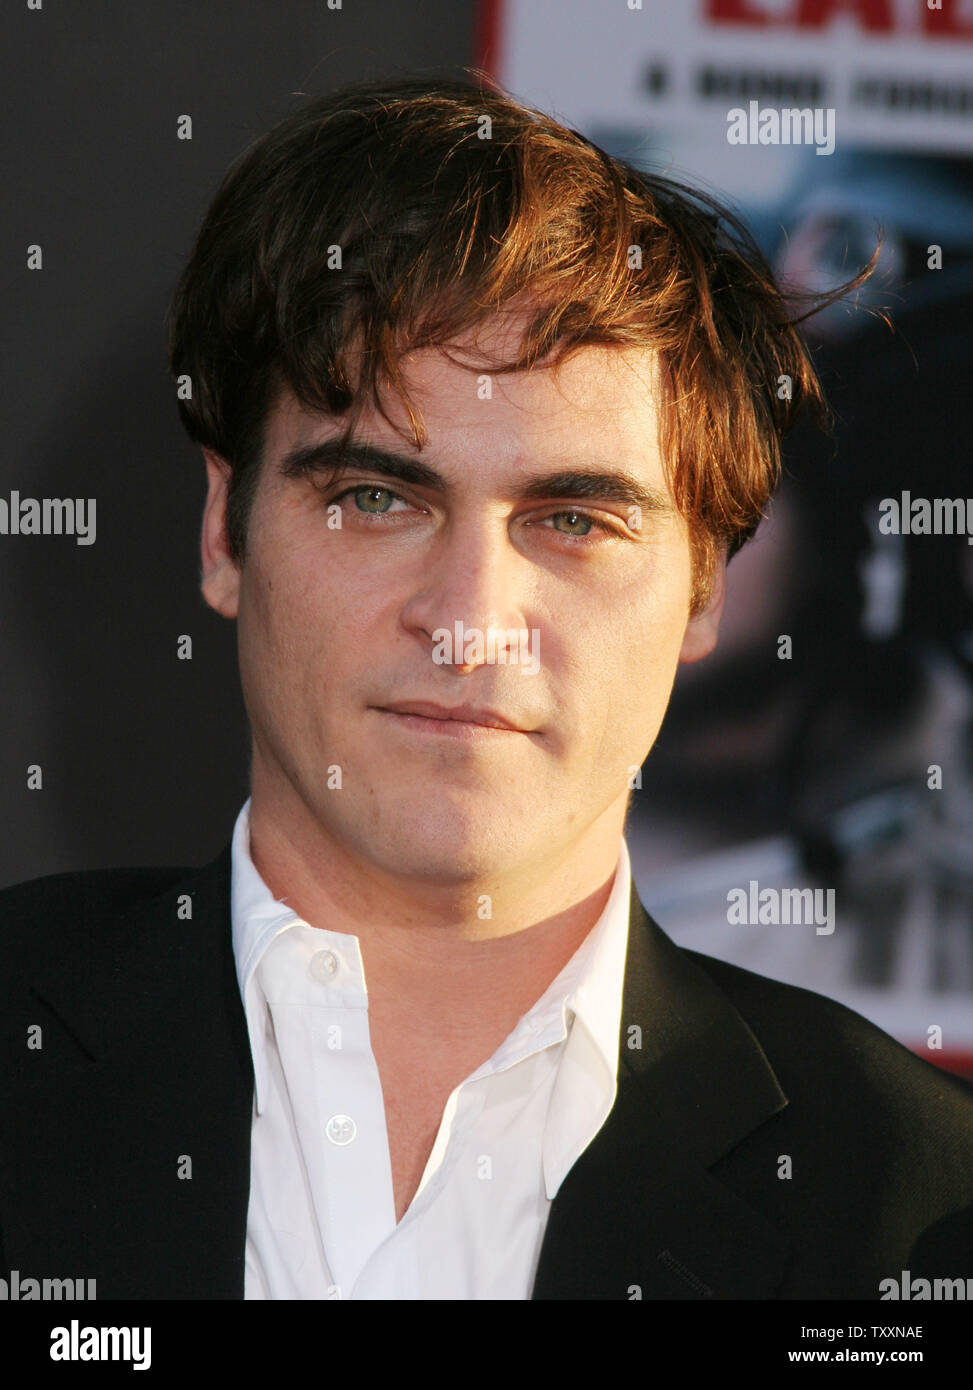 Actor Joaquin Phoenix poses for photographers at the premiere of the film, 'Ladder 49'  at The El Capitan Theatre  in Los Angeles, September 14, 2004. The Touchstone Pictures movie stars Phoenix along with John Travolta and opens in the US October 1st. (UPI Photo/Francis Specker) Stock Photo